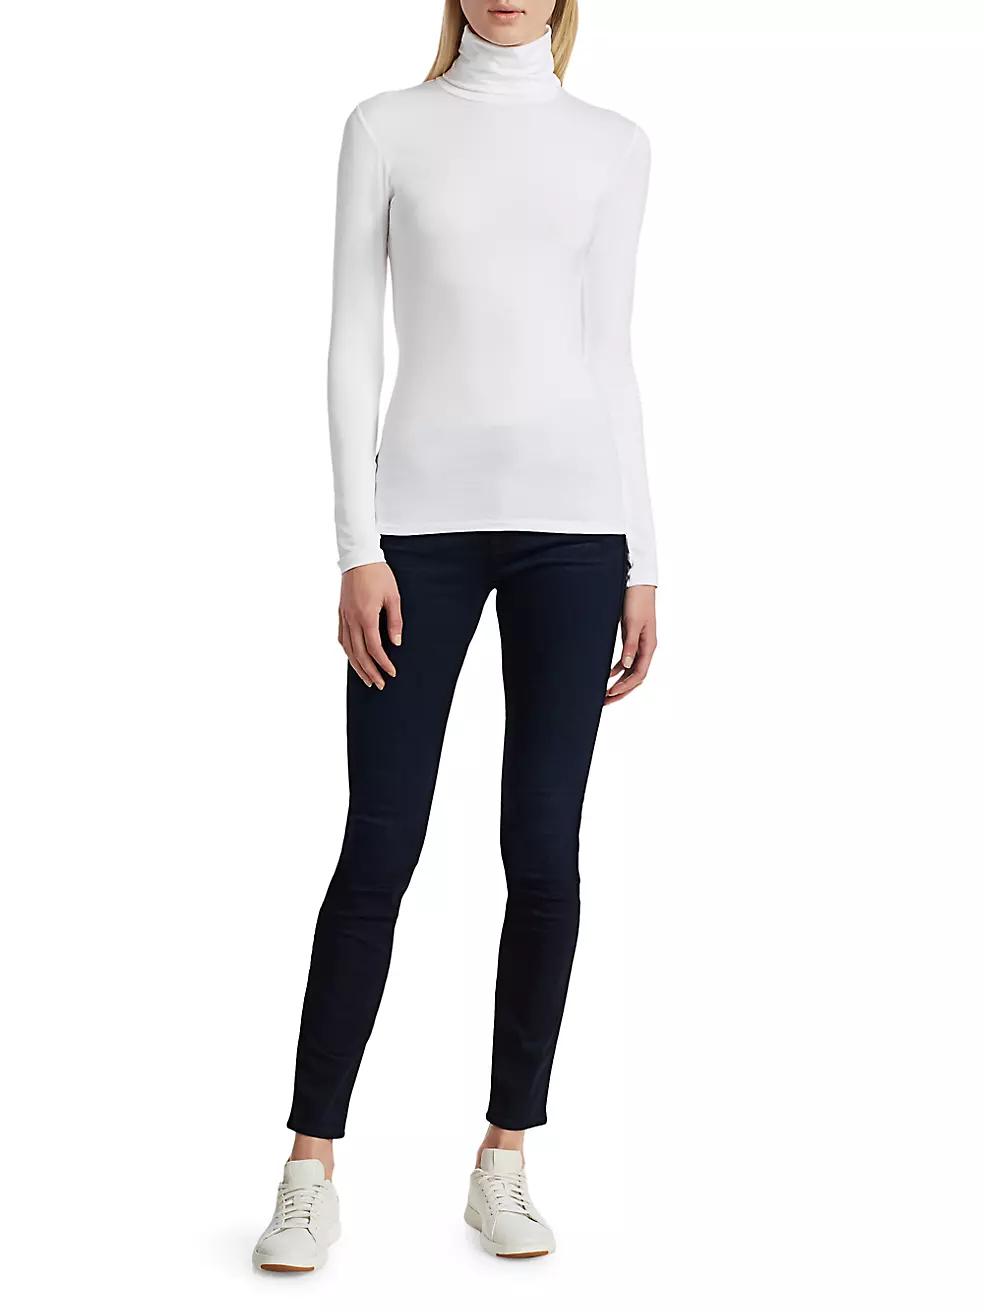 MAJESTIC FILATURES Stretch-jersey turtleneck top, Sale up to 70% off